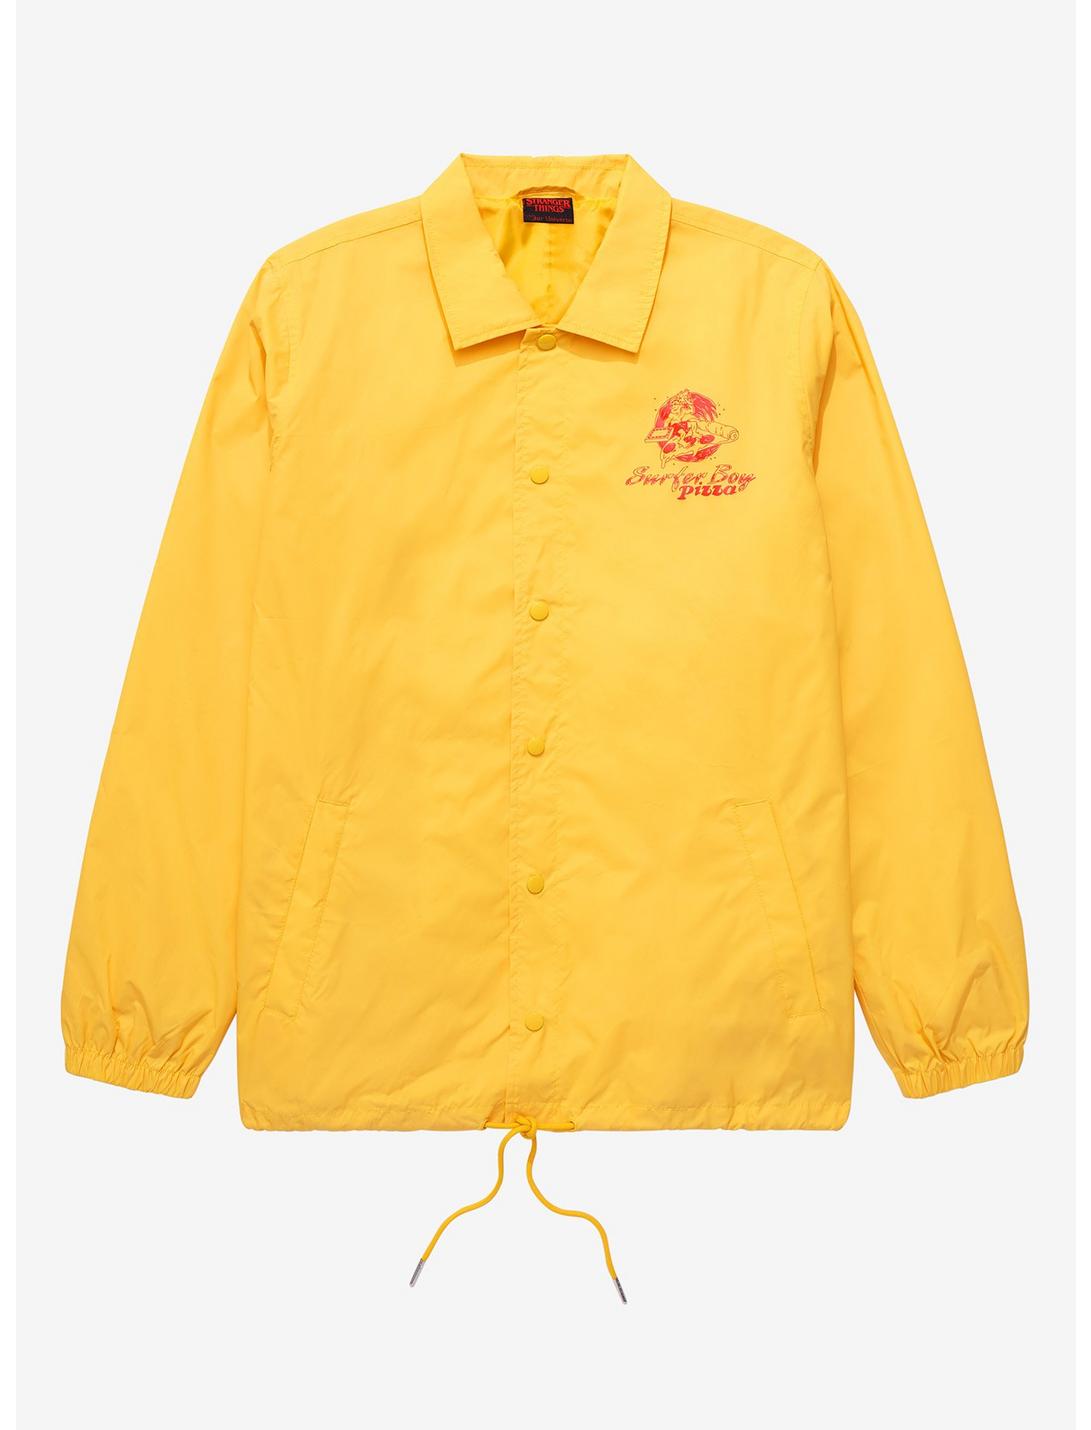 Our Universe Stranger Things Surfer Boy Pizza Coach's Jacket - BoxLunch Exclusive, RED, hi-res